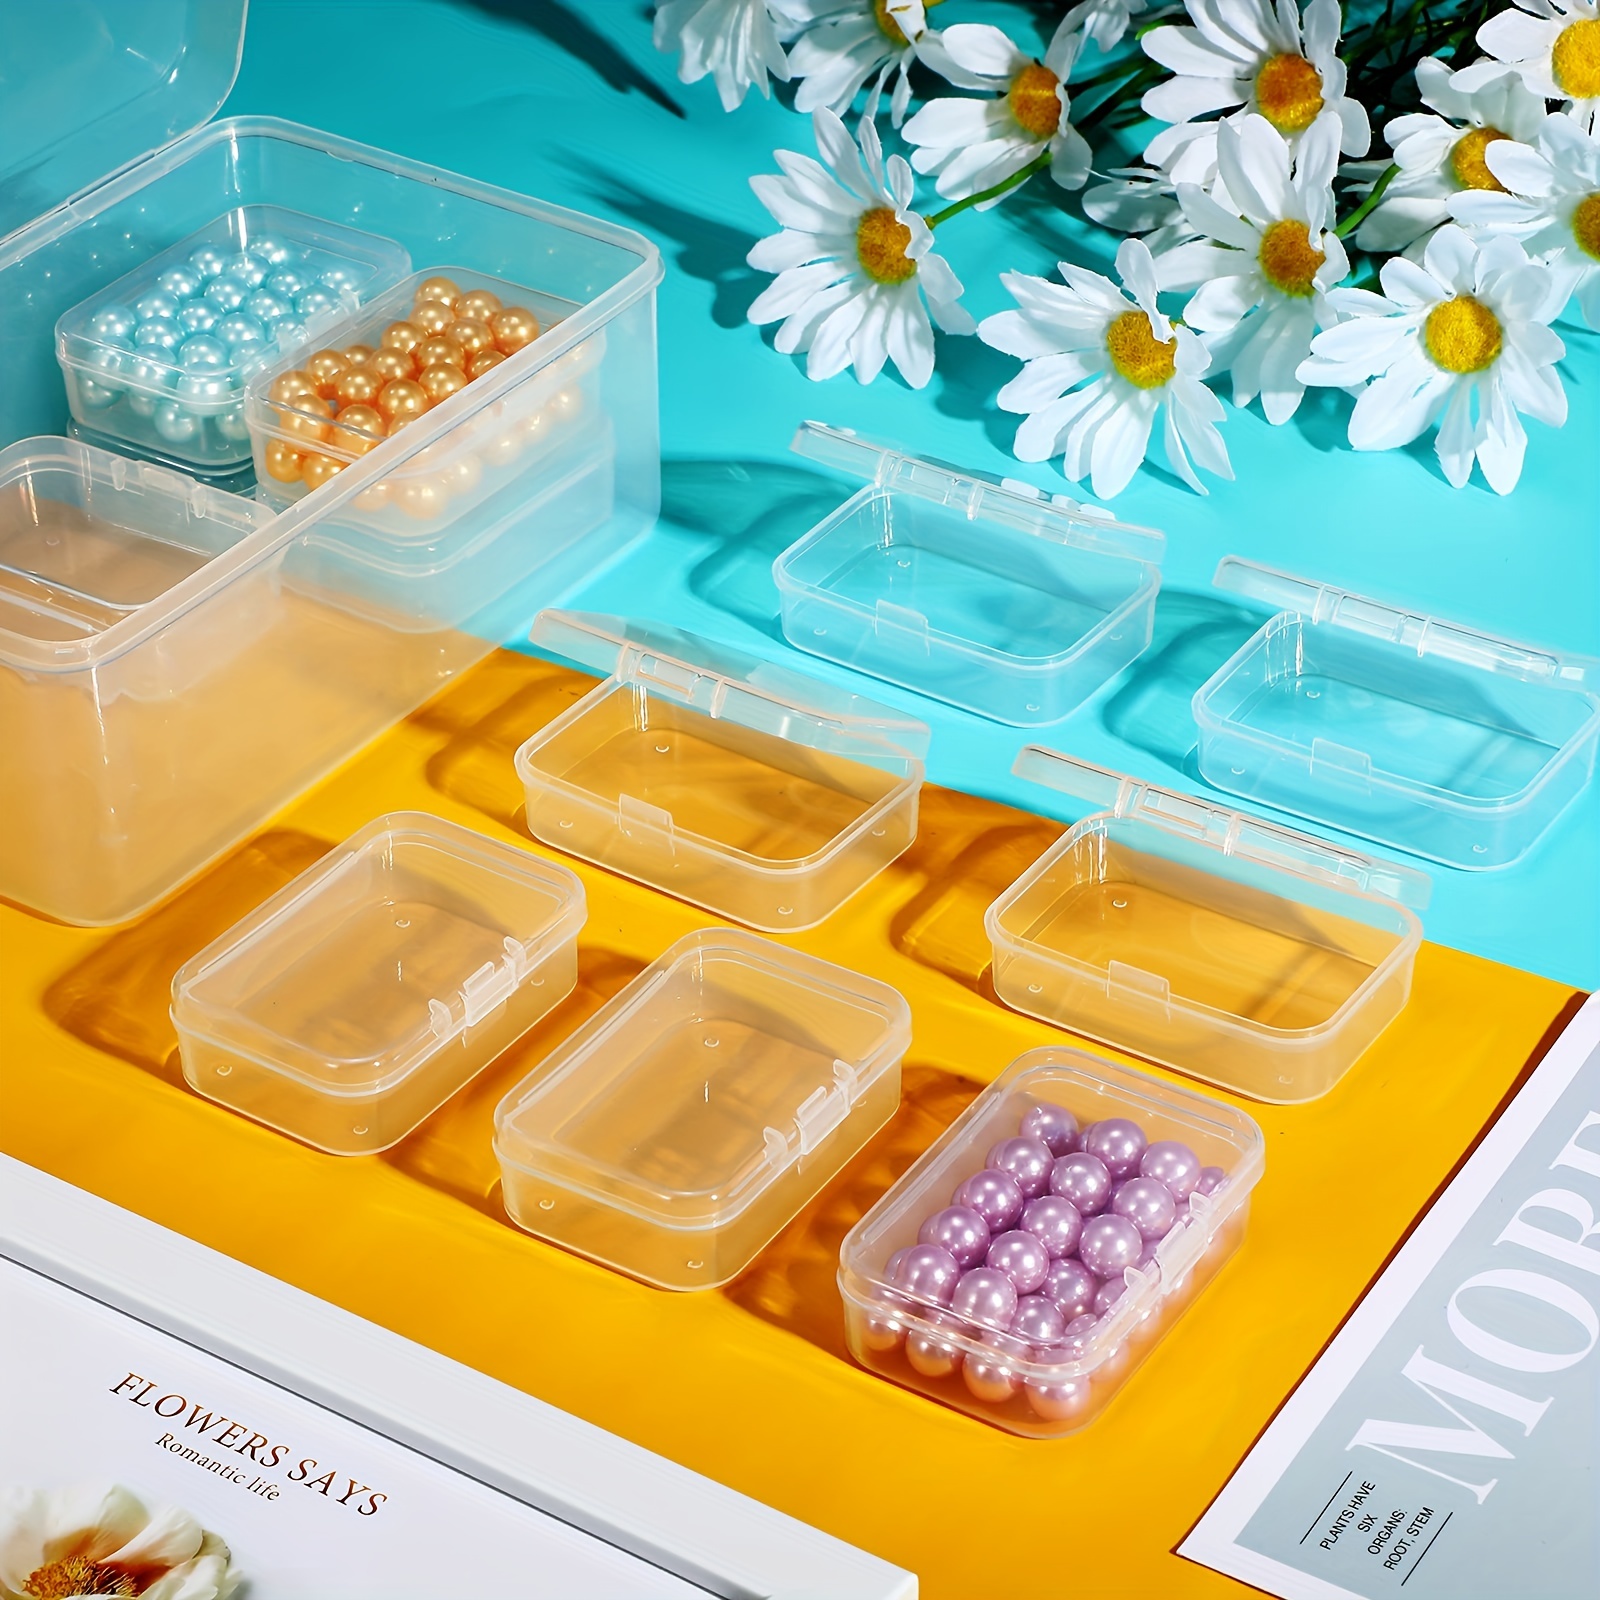 24pcs Mixed Size Rectangular Empty Mini Plastic Storage Containers With  Lid, 8 (1.6x1.6In), 8 (2.6x2In), 4 (3.3x2.3n), 4 (4.3x3.2In) For Organizing  Sm